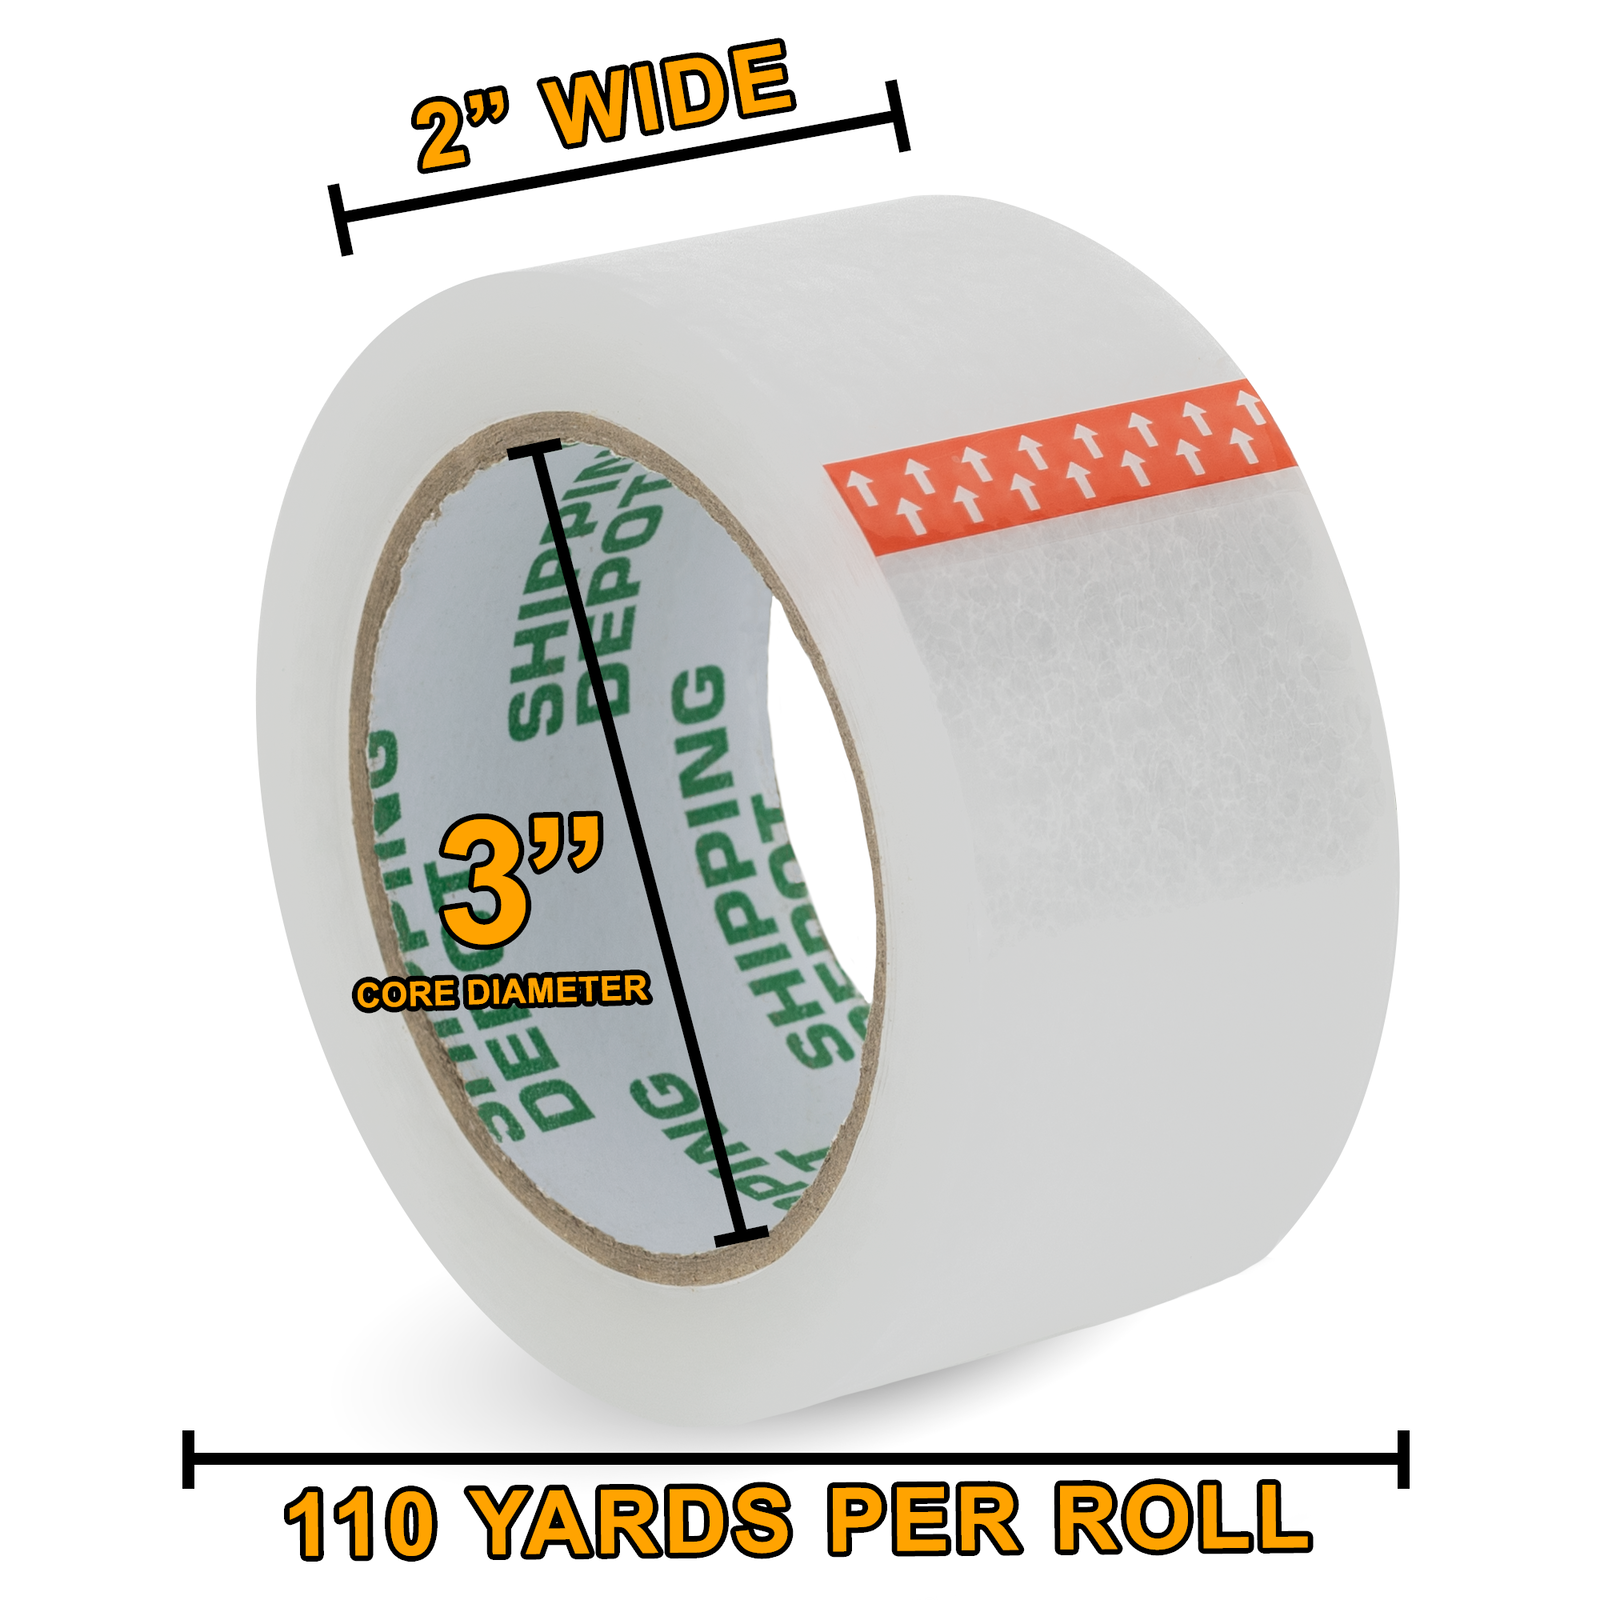 a 110 yards roll of clear tape with measurements: 2 inch wide by 3inches diameter